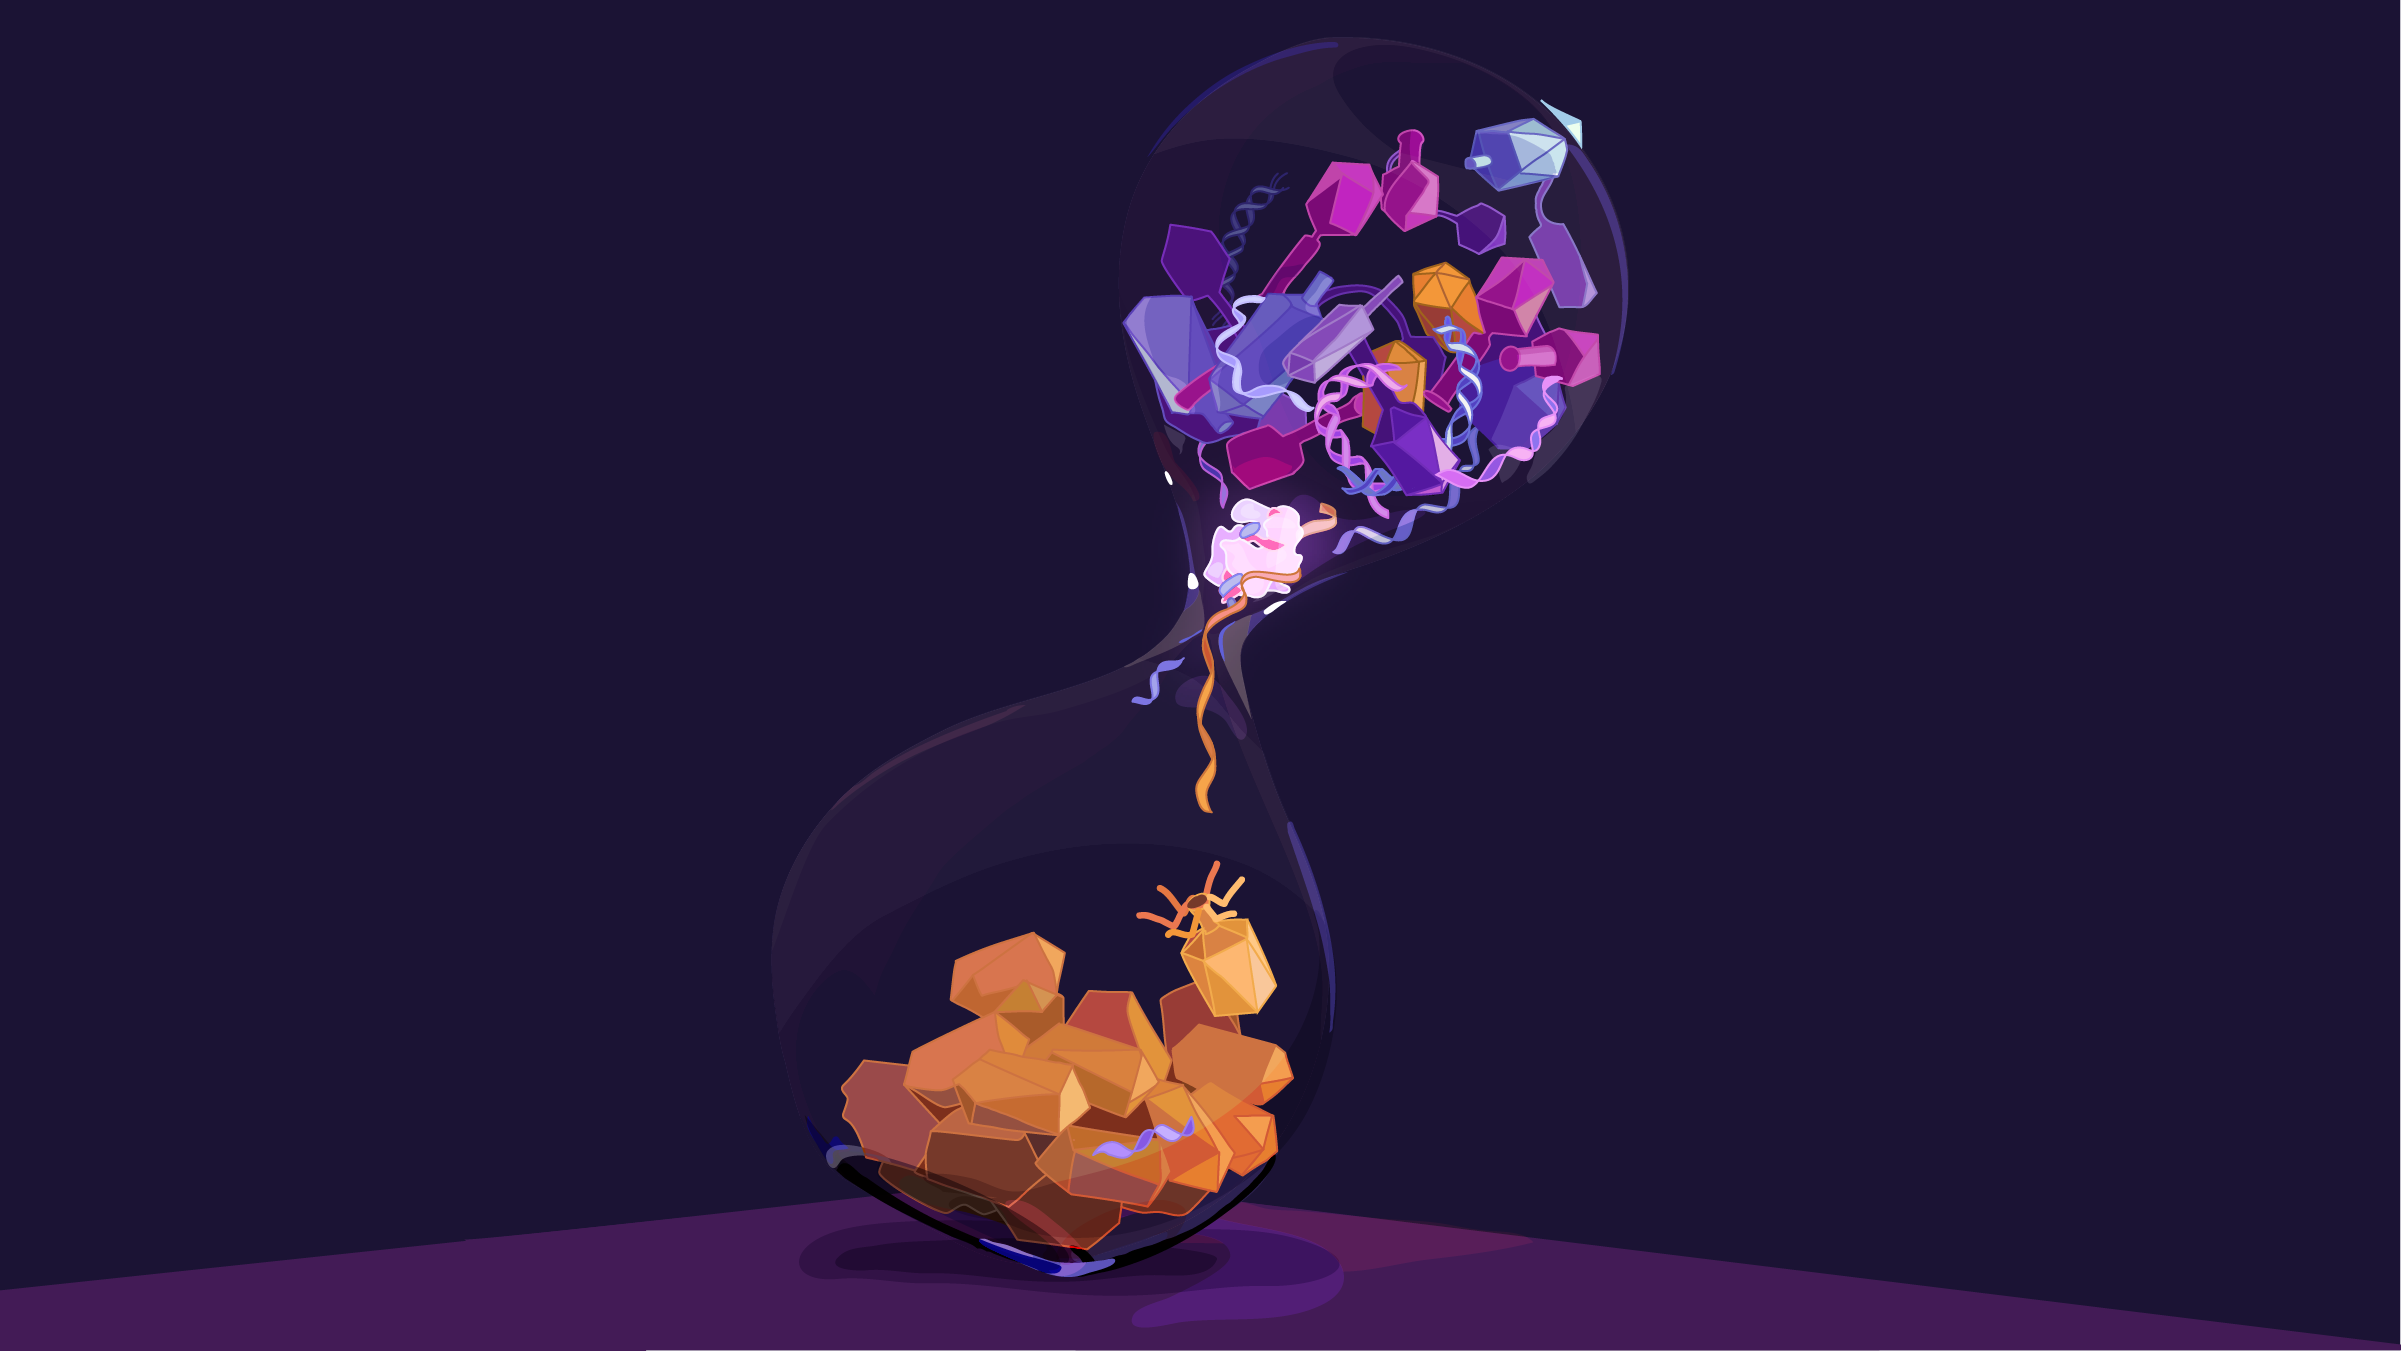 A digital illustration of an hourglass filled with pieces of virus capsules and DNA strands. The pieces at the top of the hourglass are purple, and they are flowing downward into viral pieces that are orange.